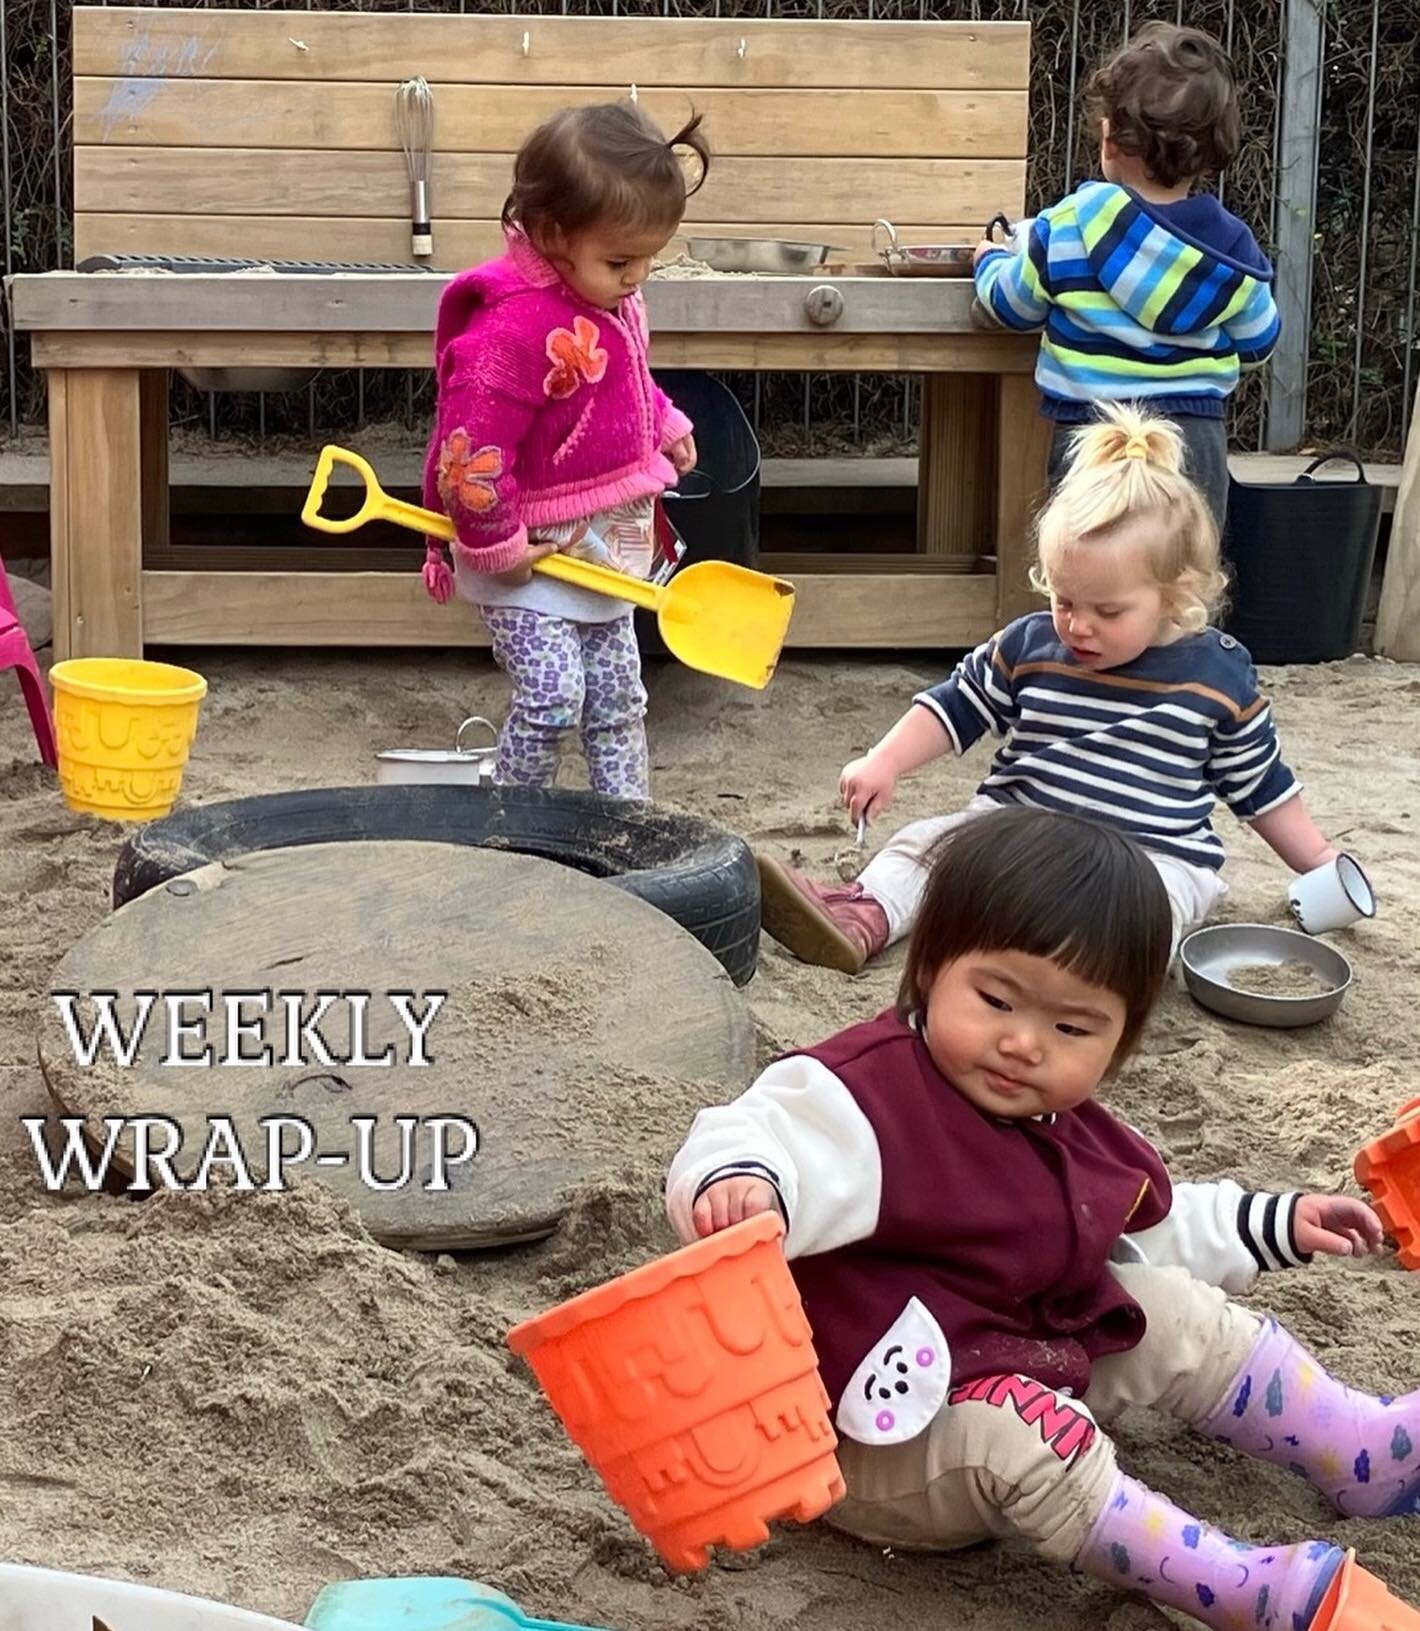 Wow what a fantastic week of signing! Our whānau have been sharing stories of the signing their tamariki have been teaching them at home!

This week in the nursery, our tamariki have been exploring the outside environment. They have loved having the 